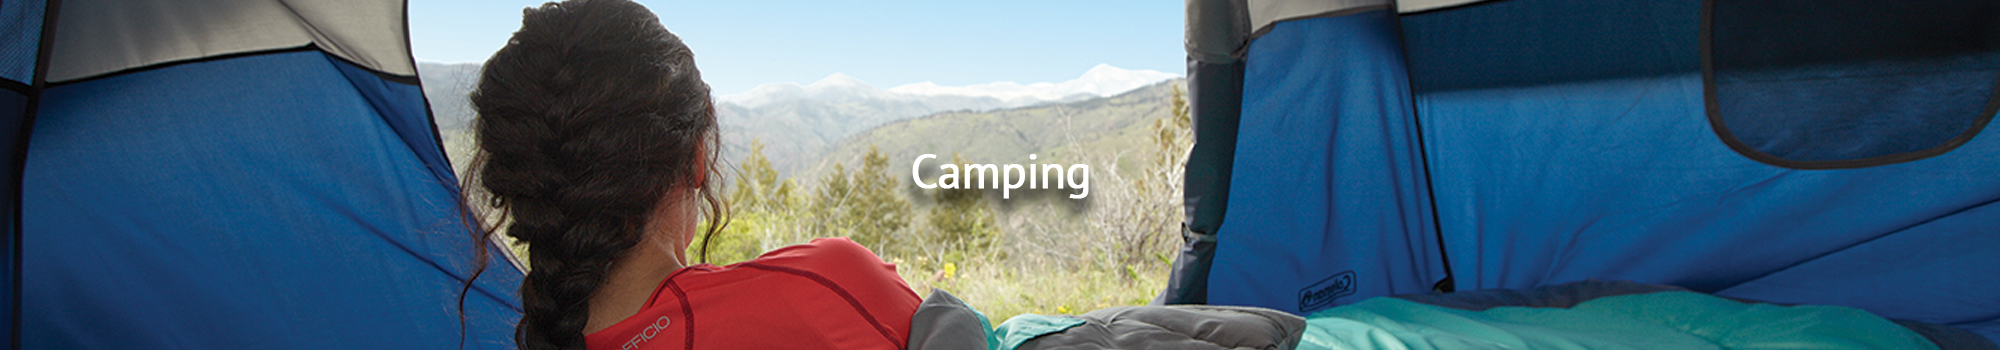 homepage-camping